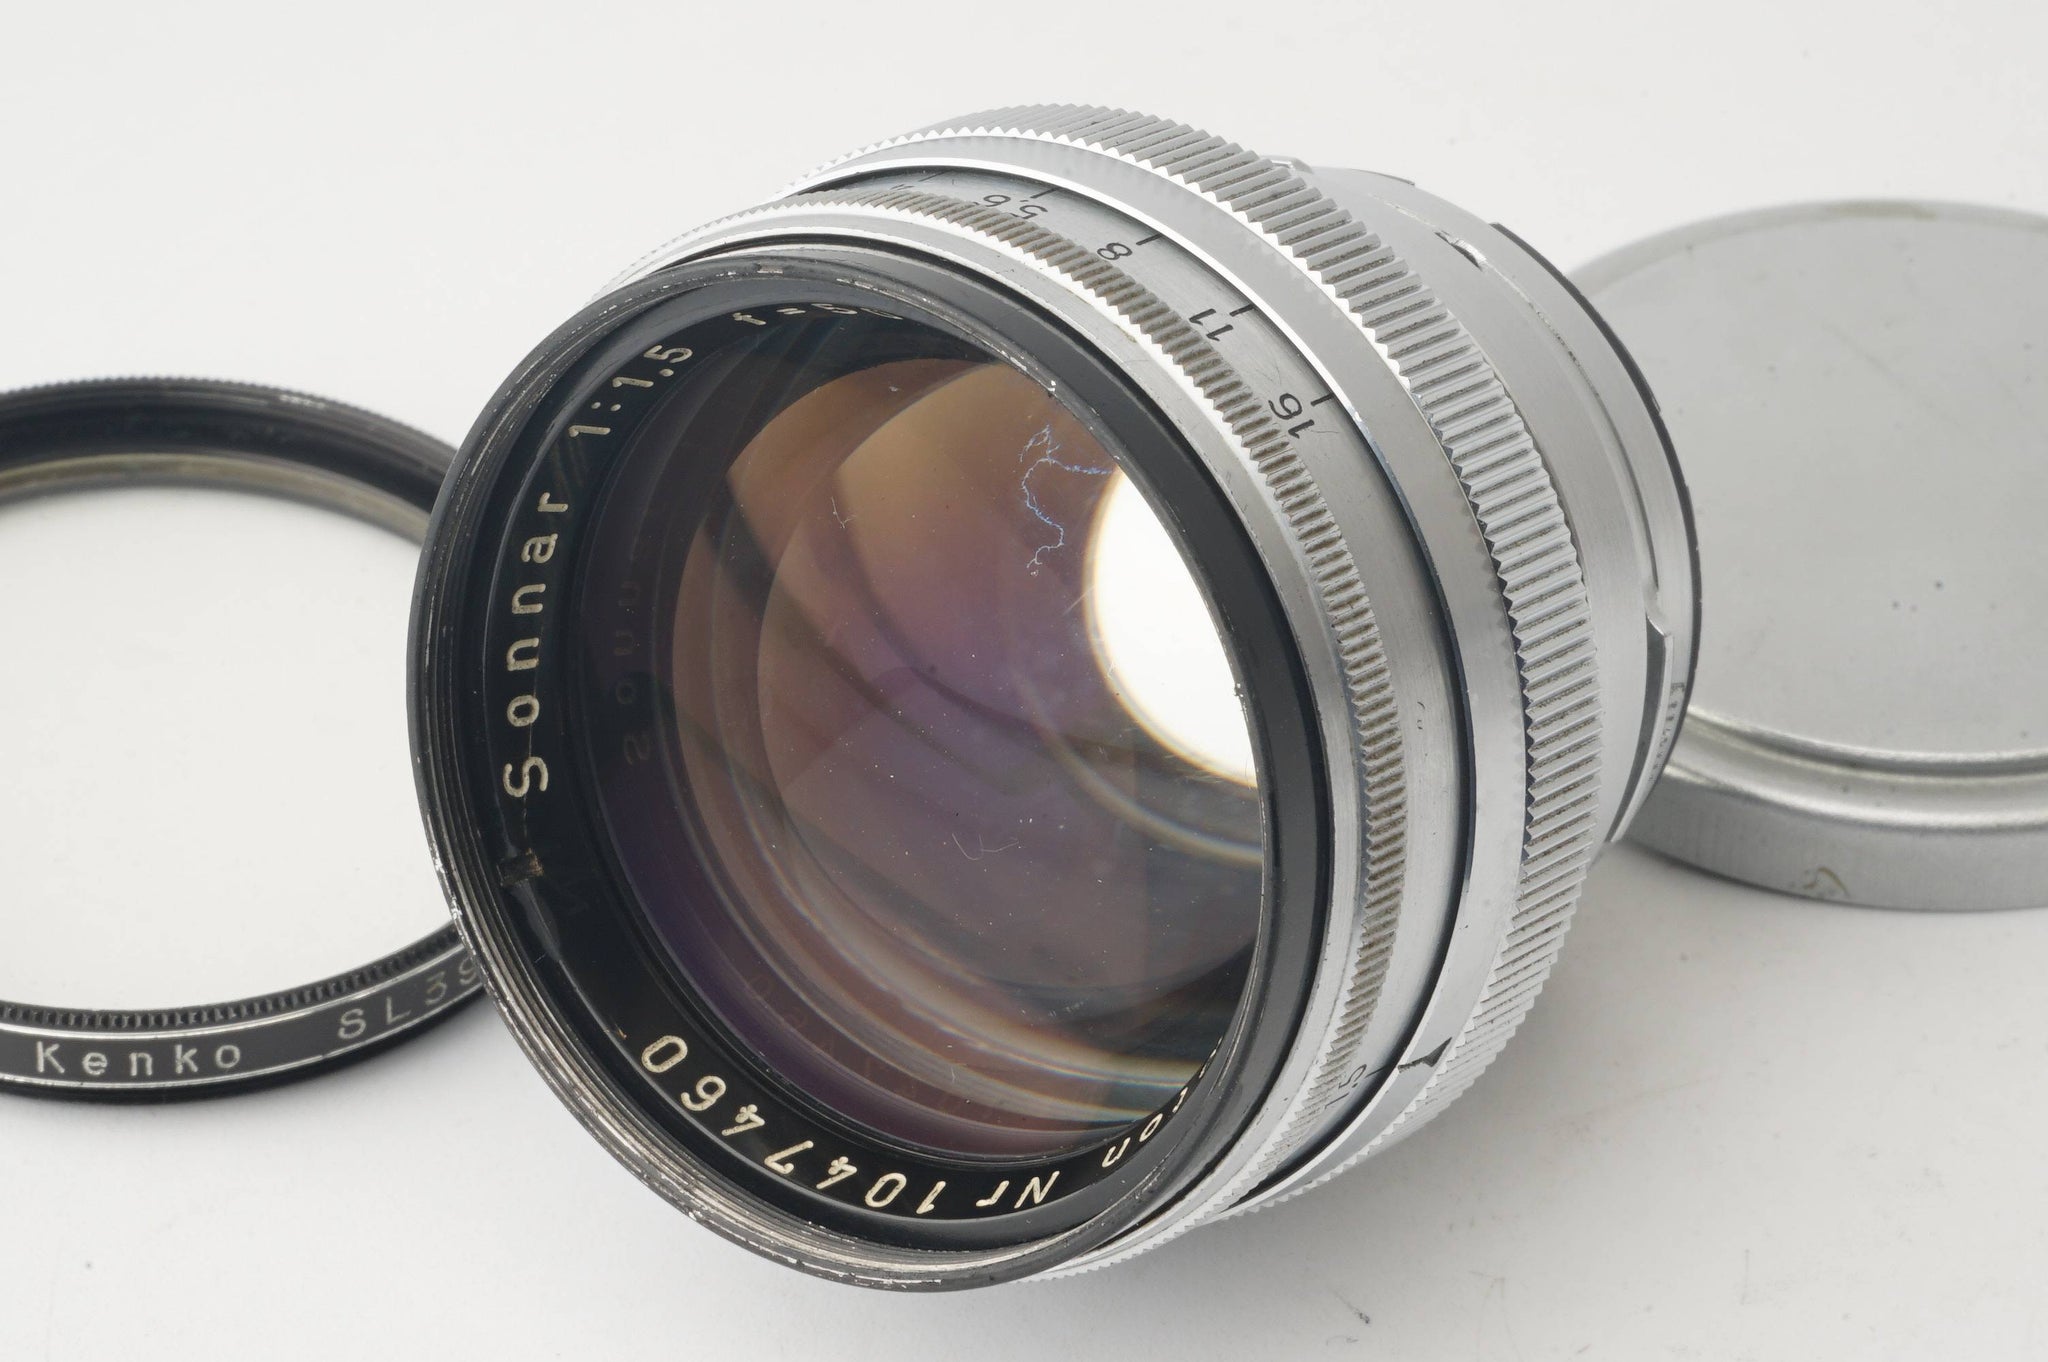 Carl Zeiss Sonnar 50mm f1.5 Sマウント - フィルムカメラ